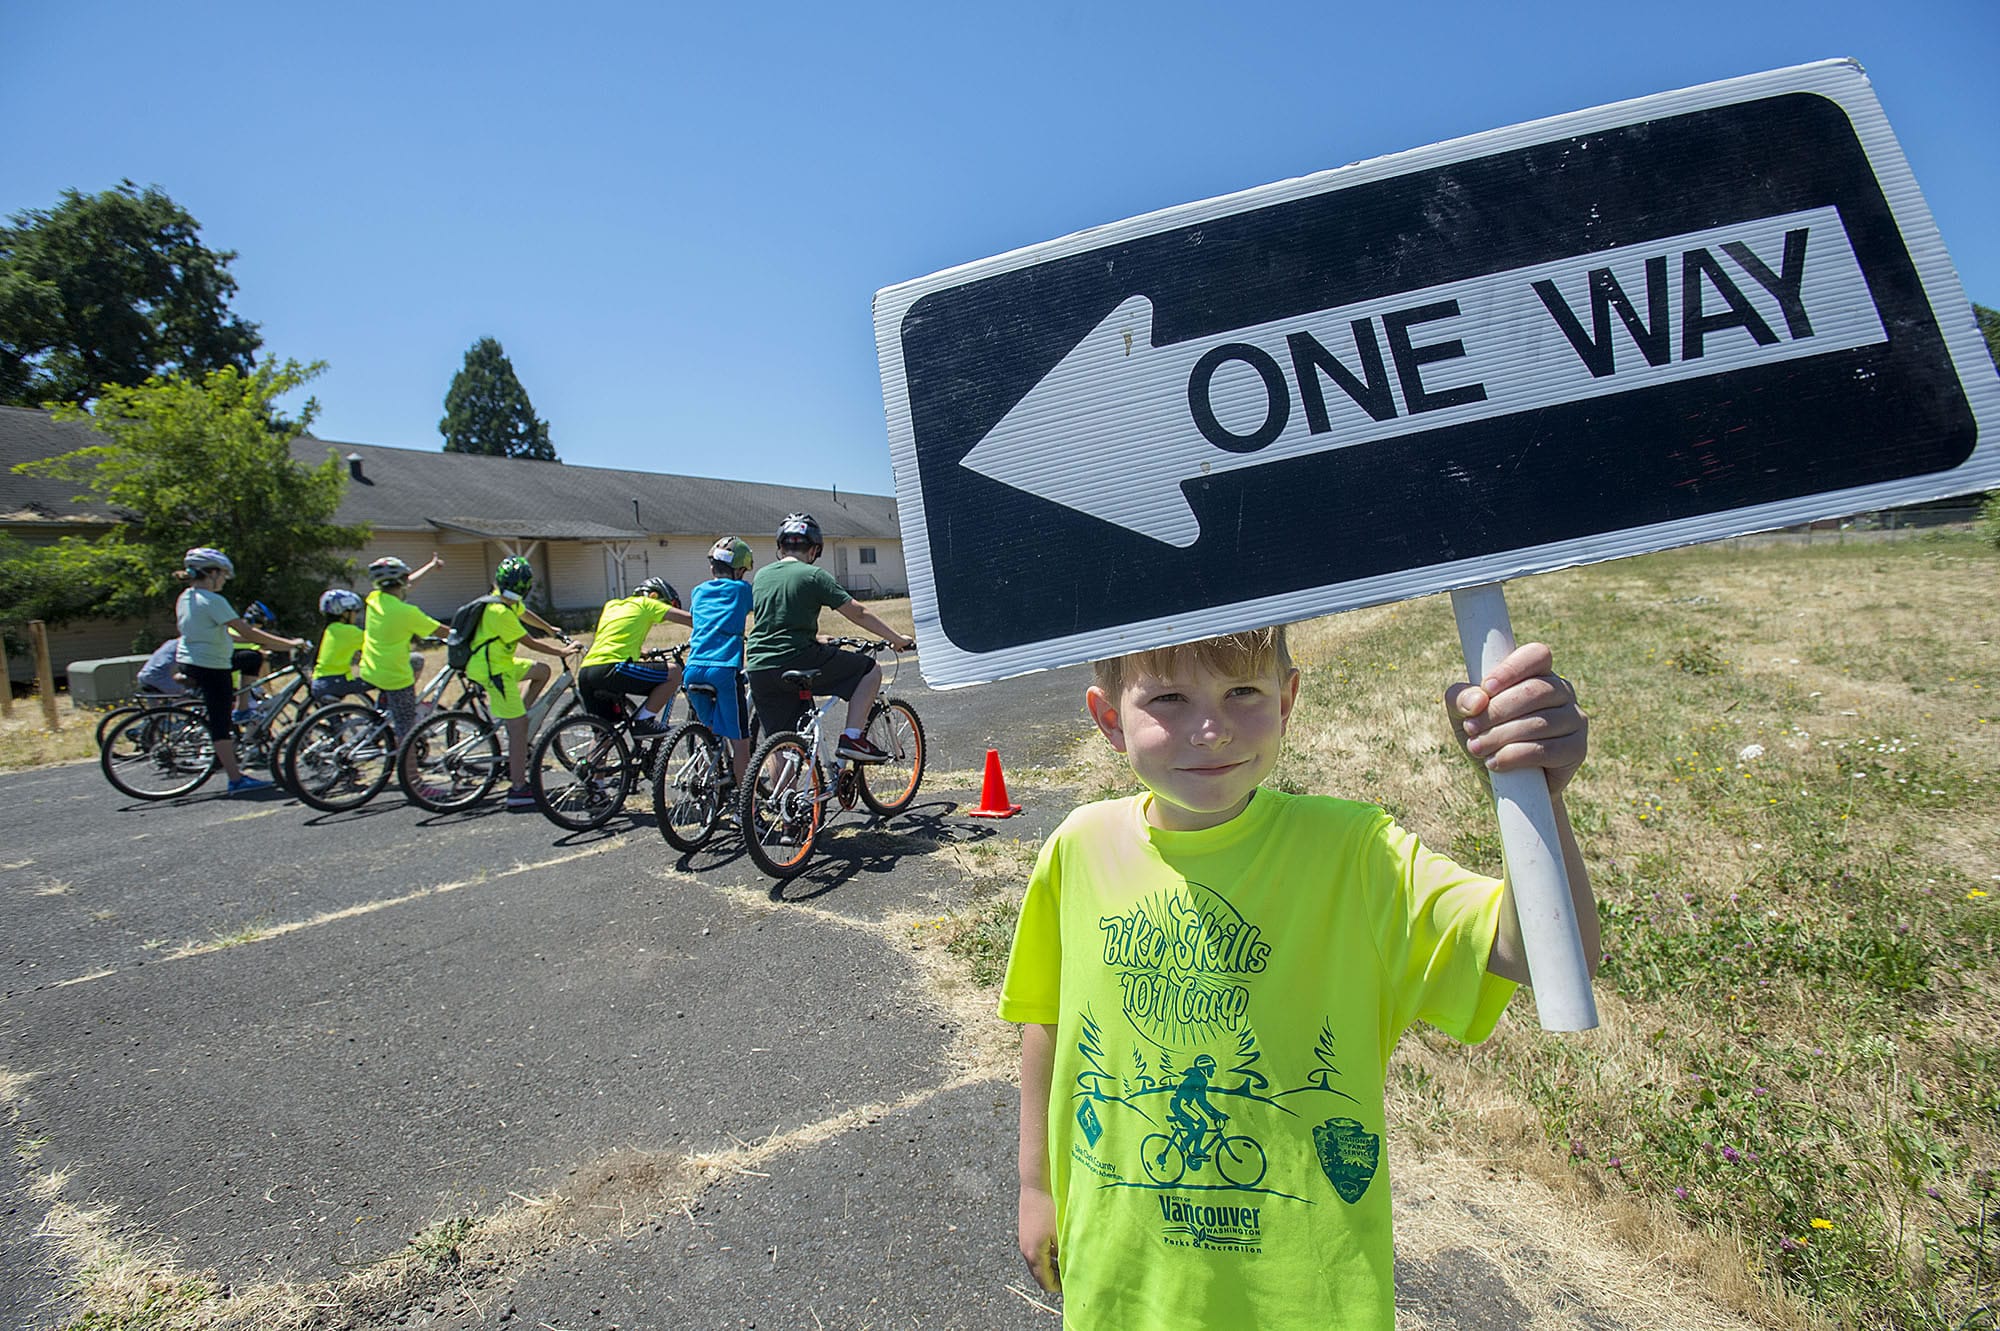 Julian Charbonneau, 8, helps with the signage as cyclists prepare to take off from the starting line during Bike Skills 101 Camp at Fort Vancouver National Historic Site on Tuesday afternoon, July 11, 2017.